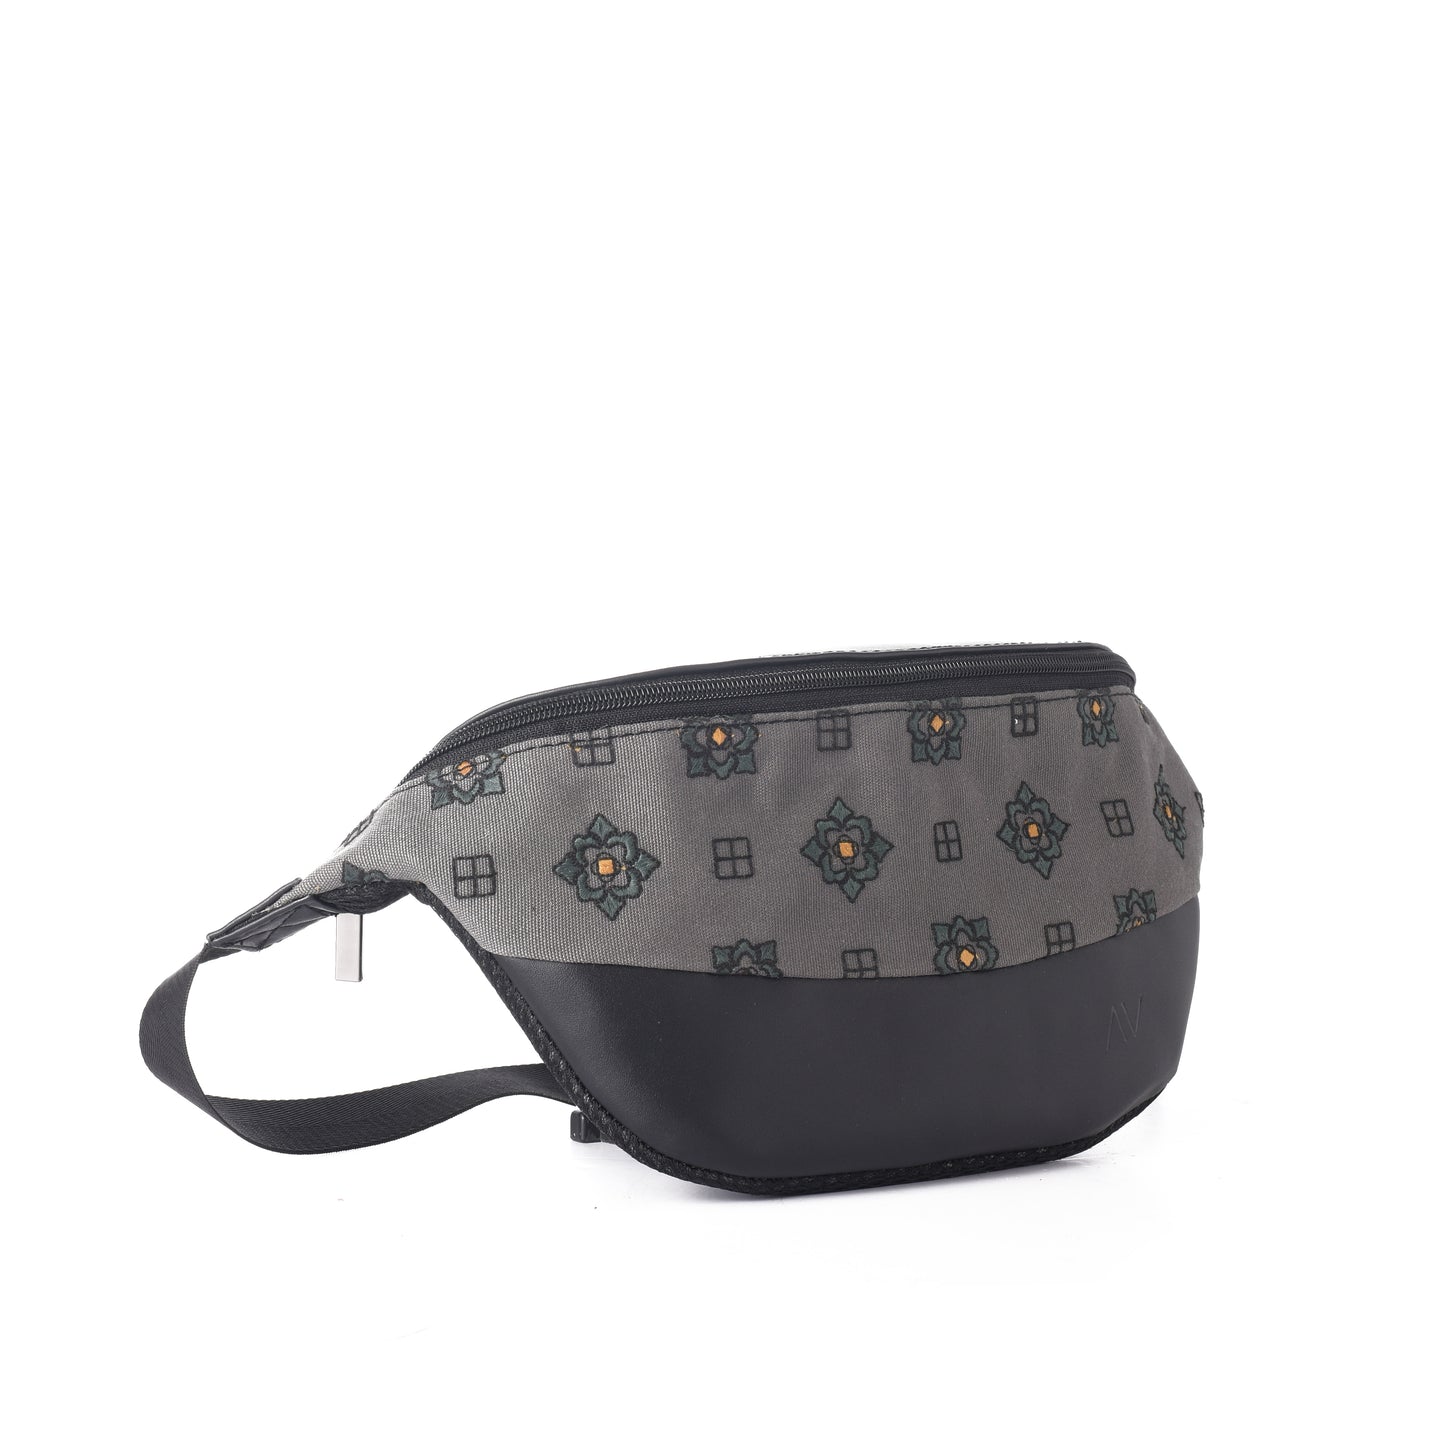 Fanny pack - Black with Olive Islamic pattern